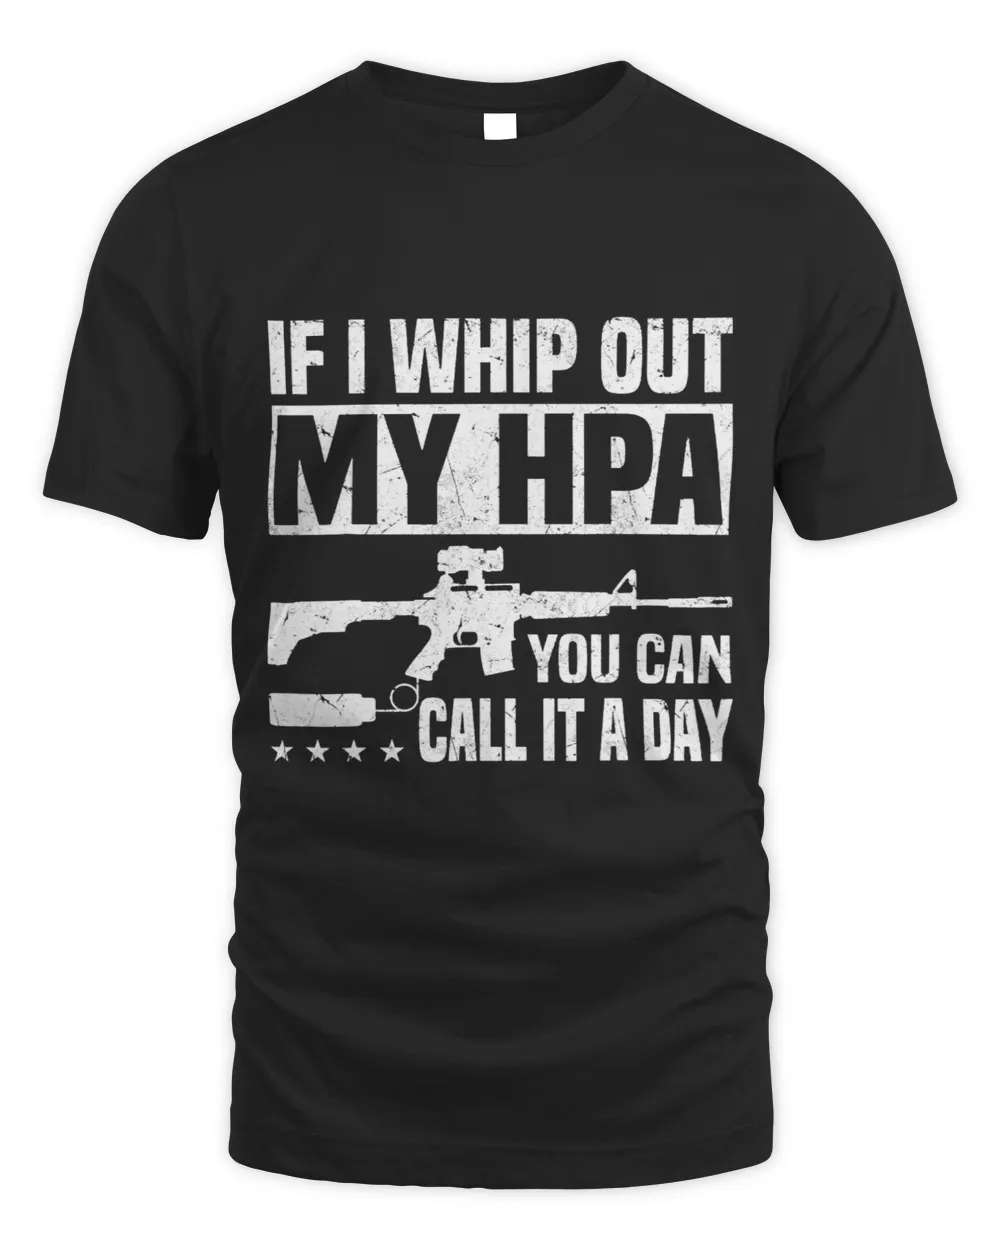 If I whip out my HPA you can call it a day